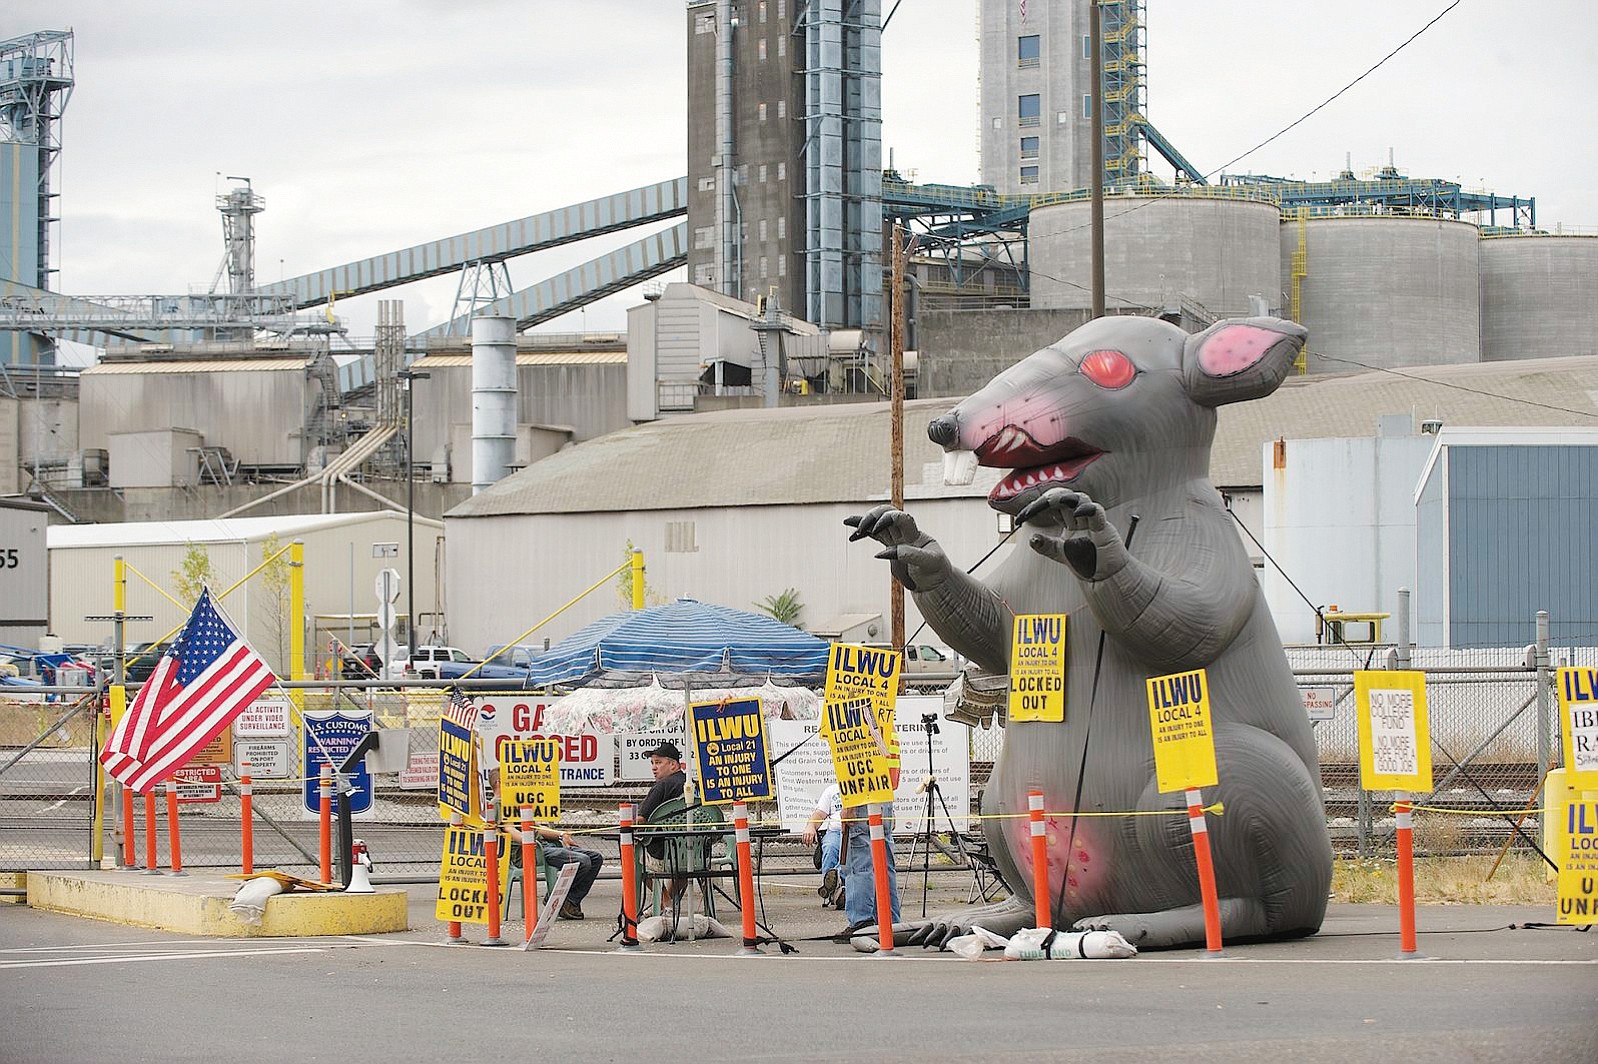 Local members of the International Longshore and Warehouse Union, locked out by United Grain Corp. at the Port of Vancouver, added a 12-foot-tall inflatable rat to their protest on Aug.